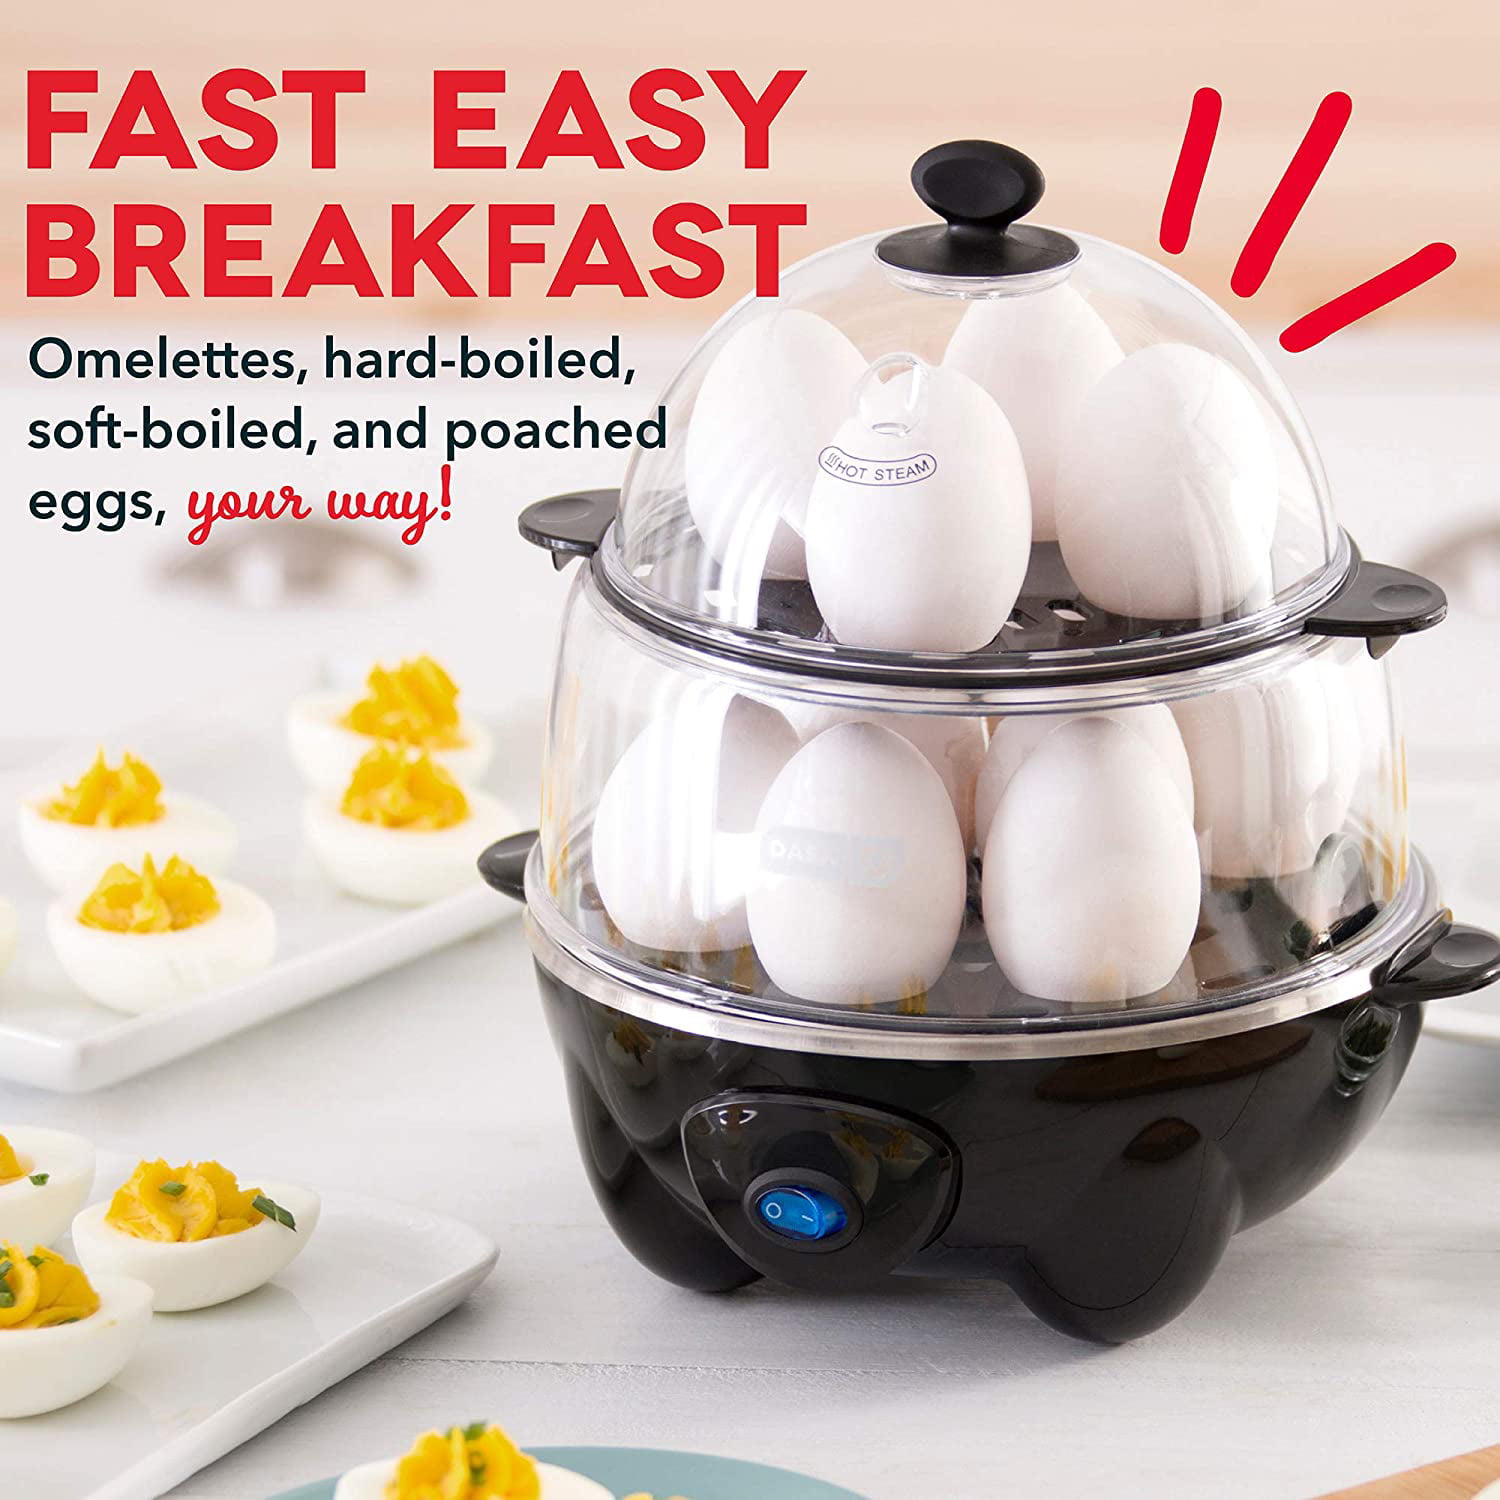 Egg Cooker Aicook Rapid Egg Cooker with Auto Shut off Medium 8 Egg Capacity Electric Egg Maker for Soft Stainless Steel Hard Boiled Eggs and Poacher Attachment